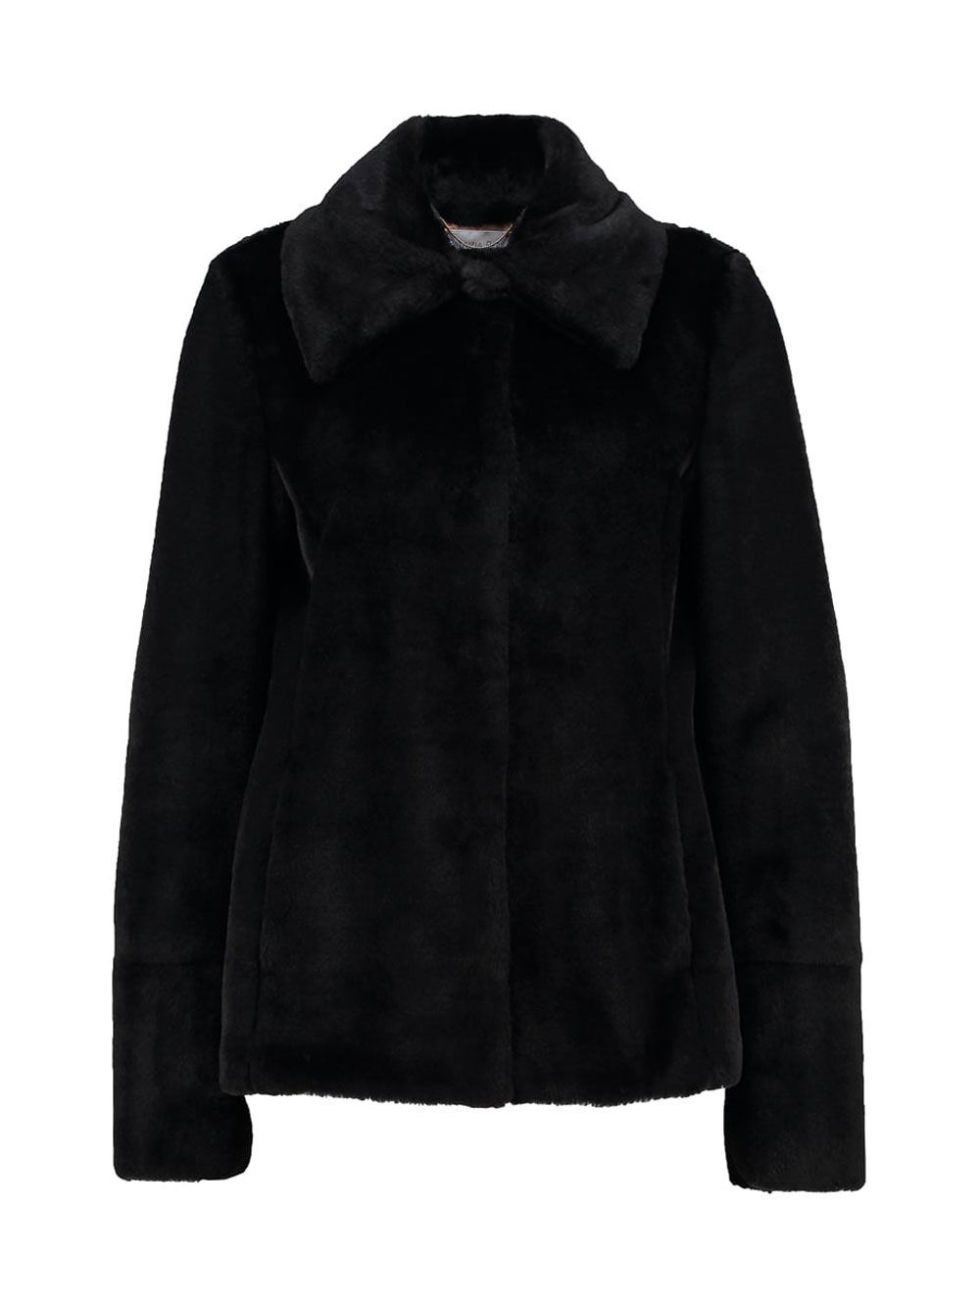 Clothing, Sleeve, Collar, Coat, Textile, Outerwear, Jacket, Fashion, Black, Natural material, 